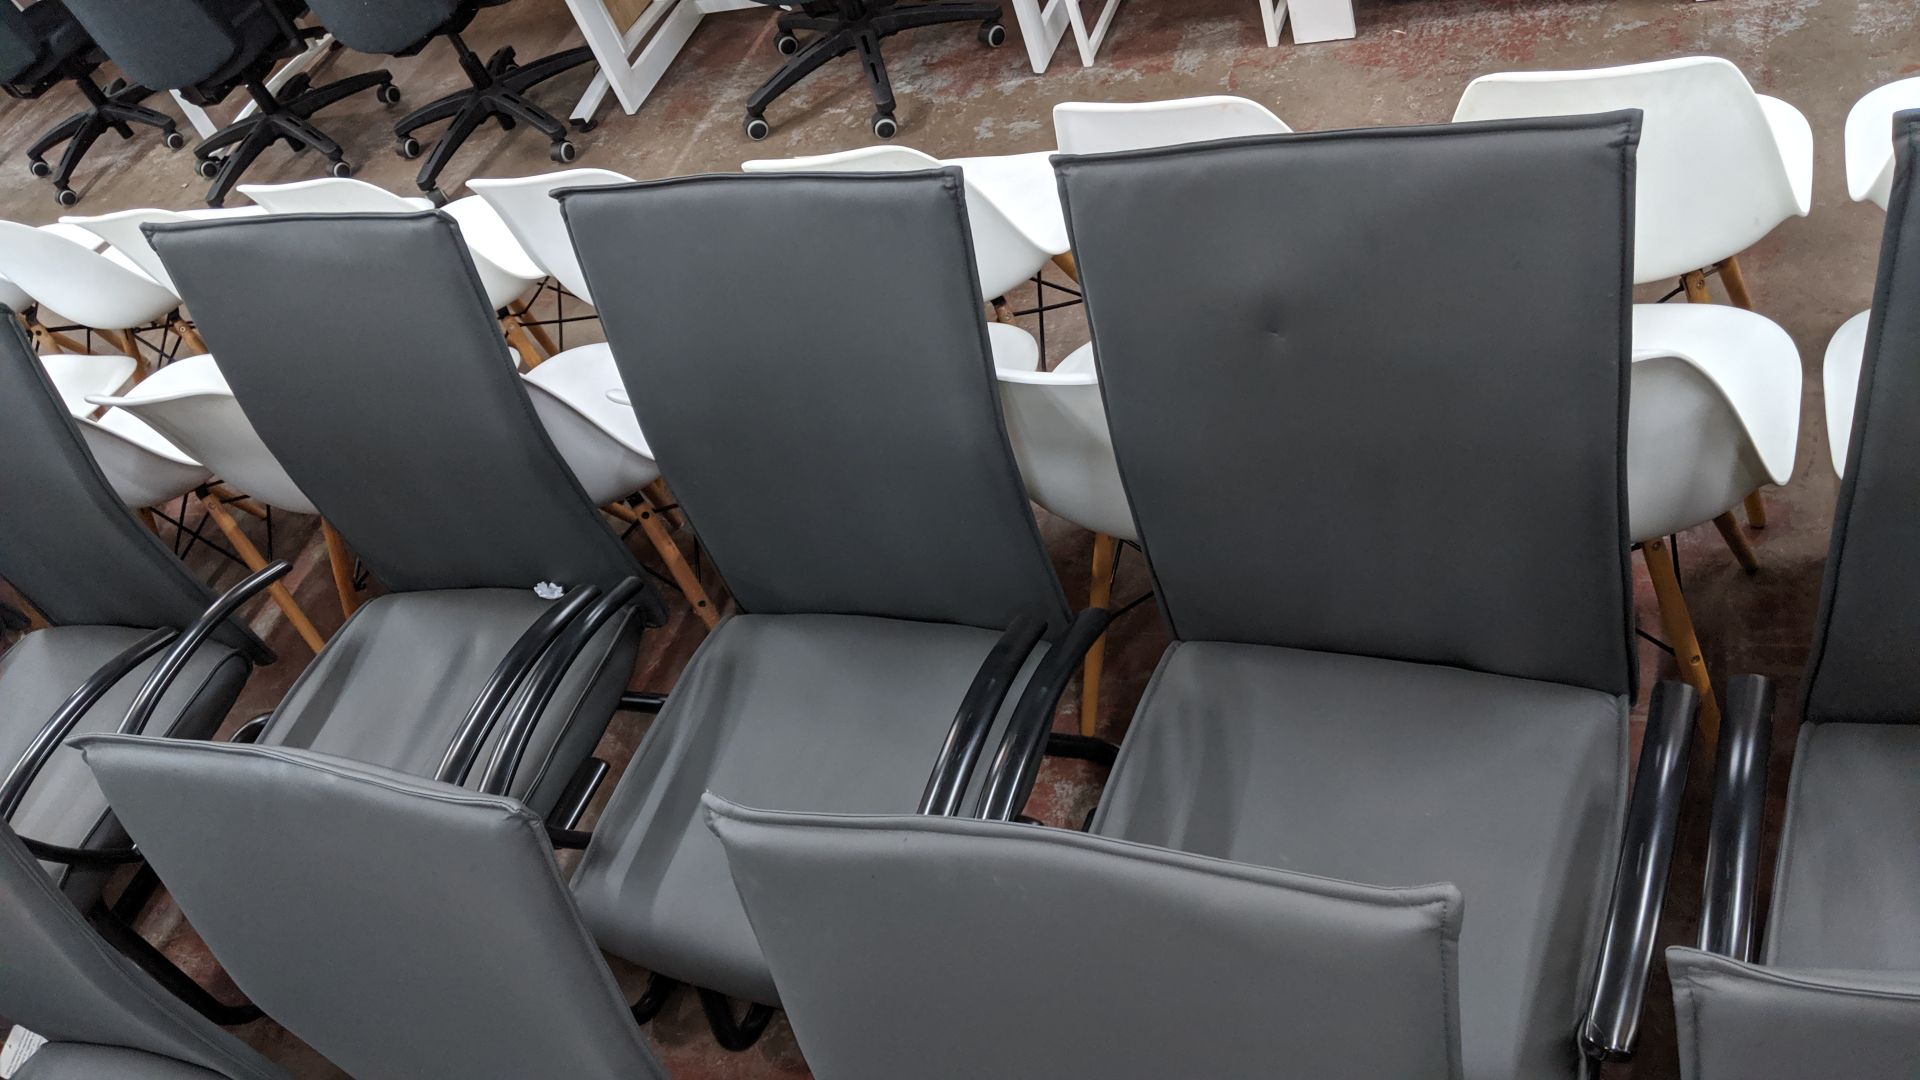 6 off black metal cantilever framed executive/meeting chairs with grey leather-look upholstery NB. - Image 2 of 4